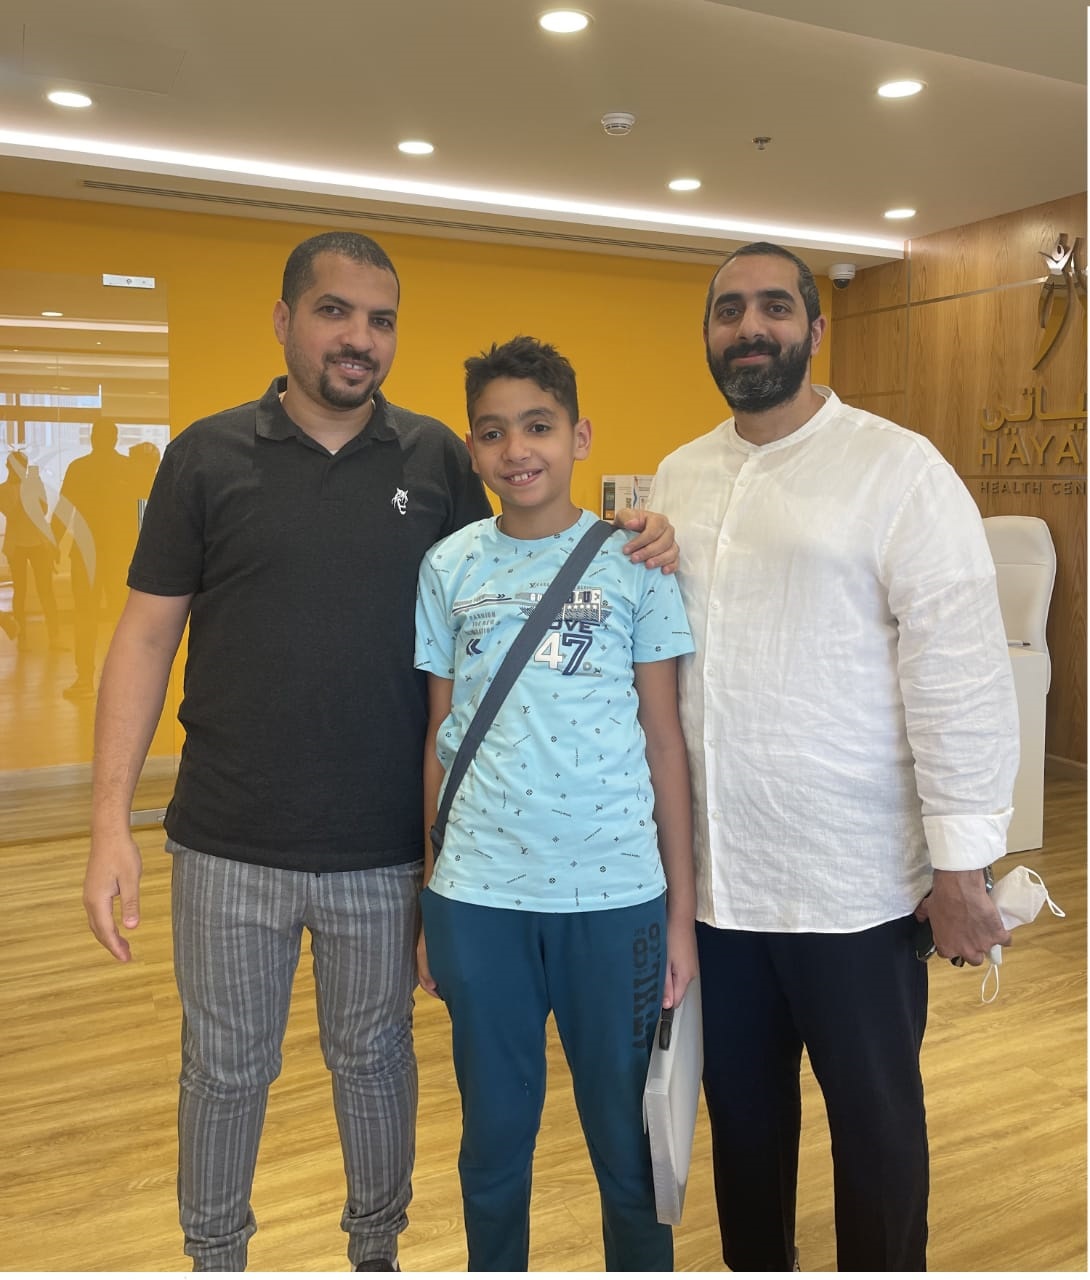 11 year old Egyptian boy with ADHD & mild autism finds support in Dubai after years of struggle